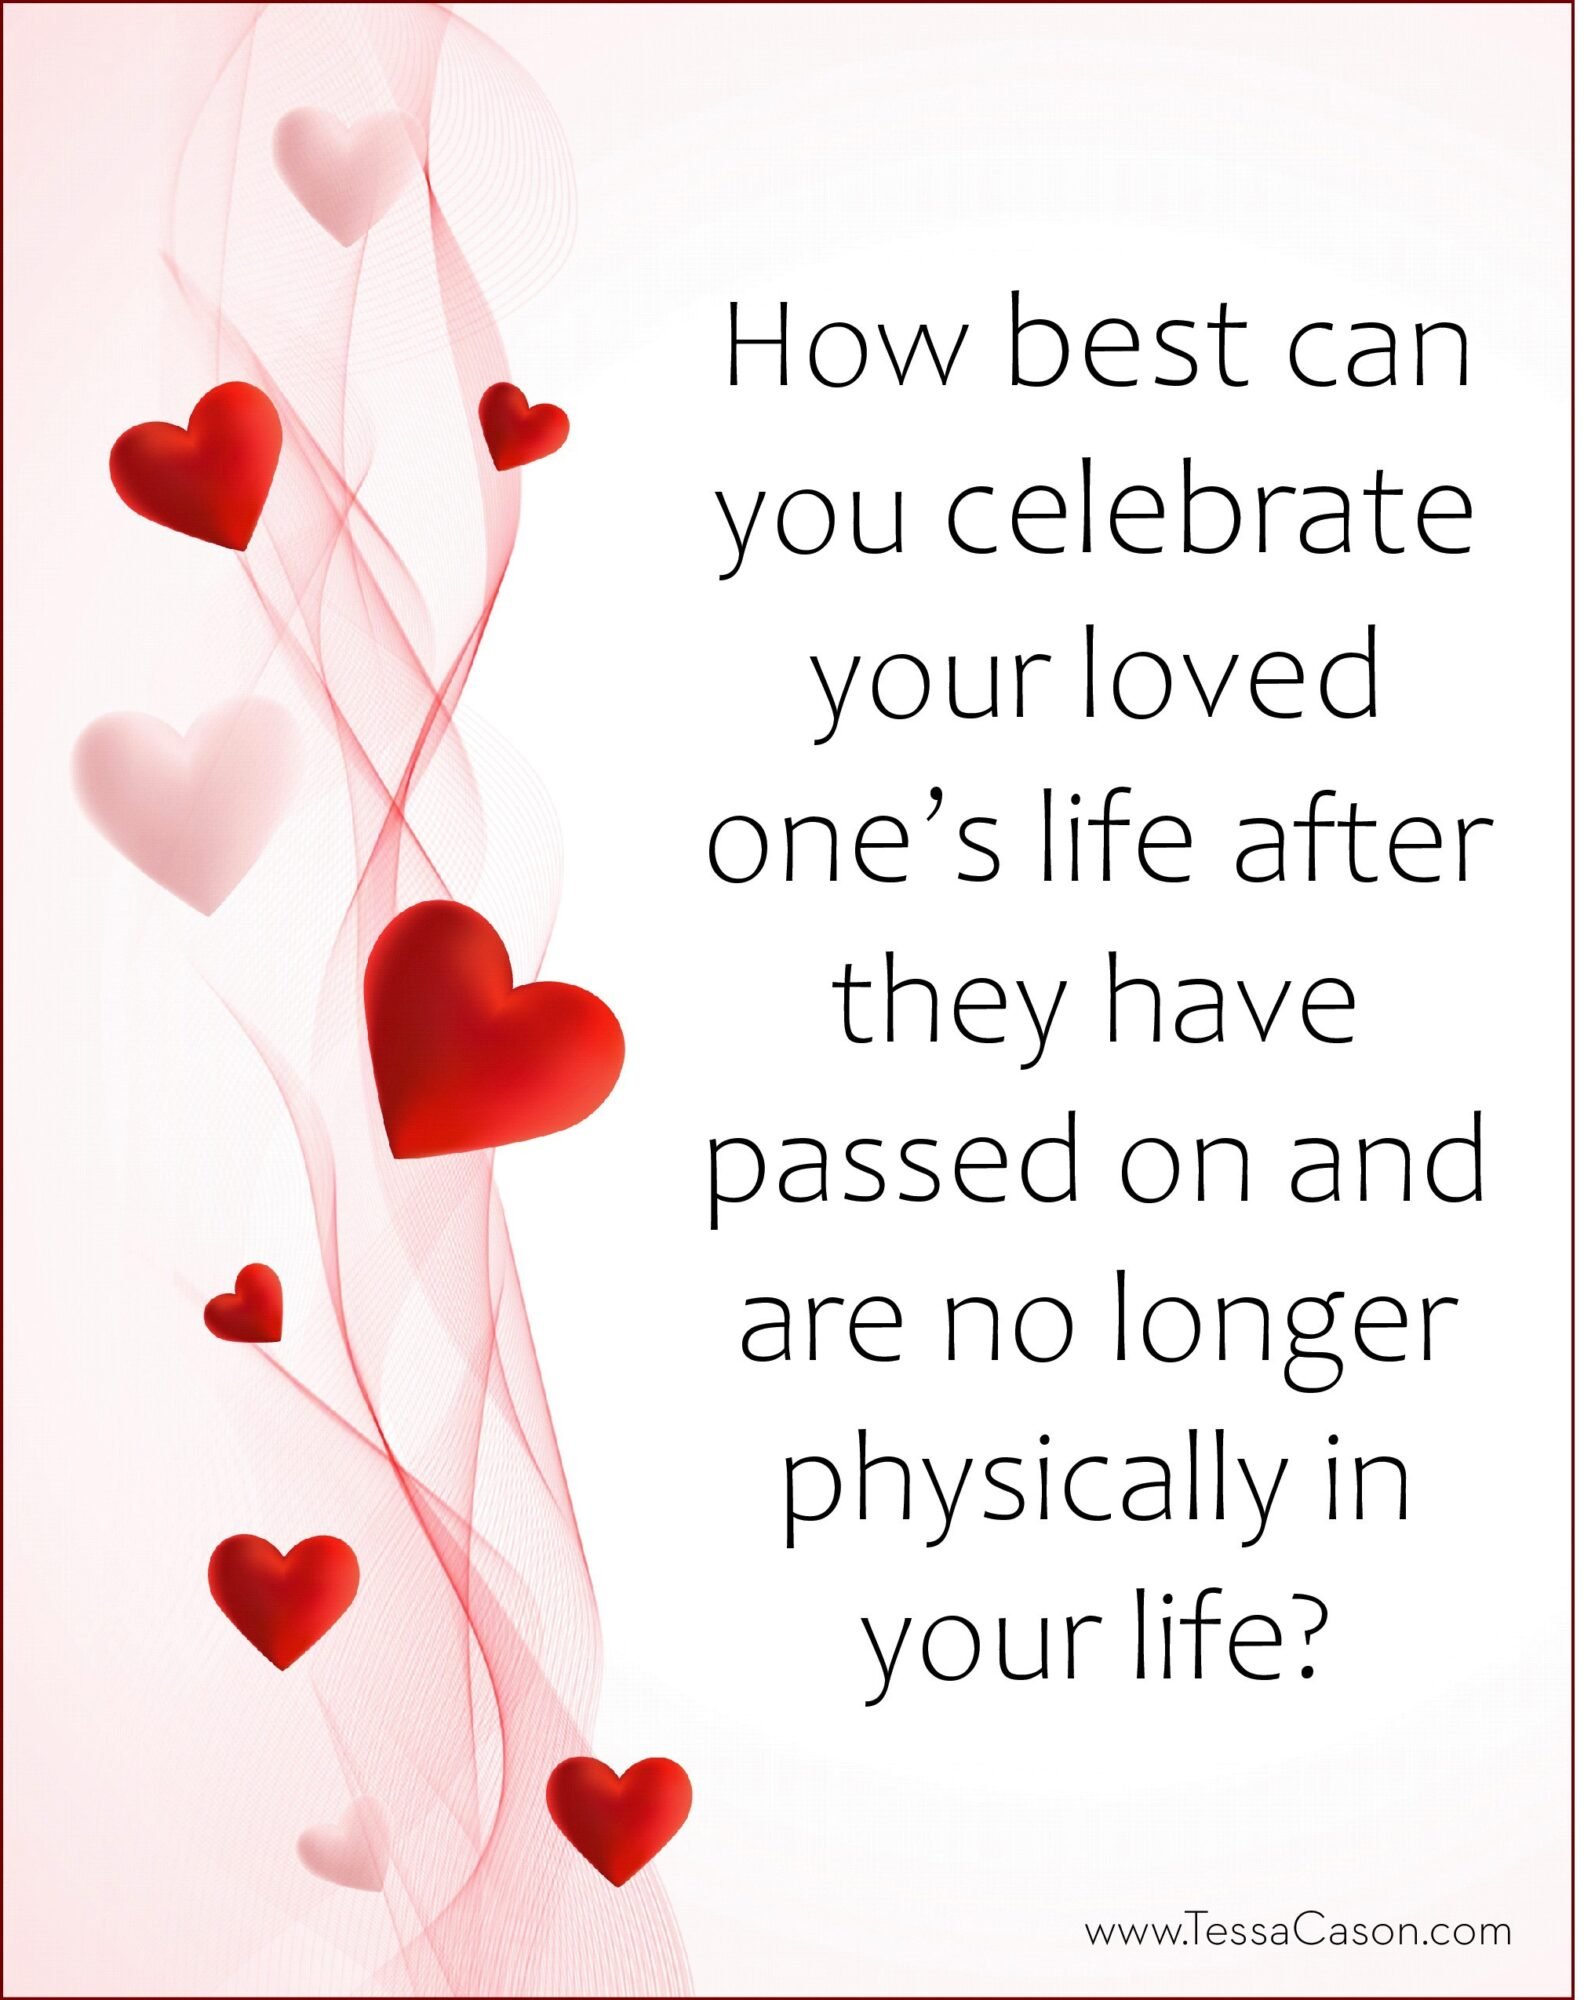 How best can you celebrate your loved one after they have passed on